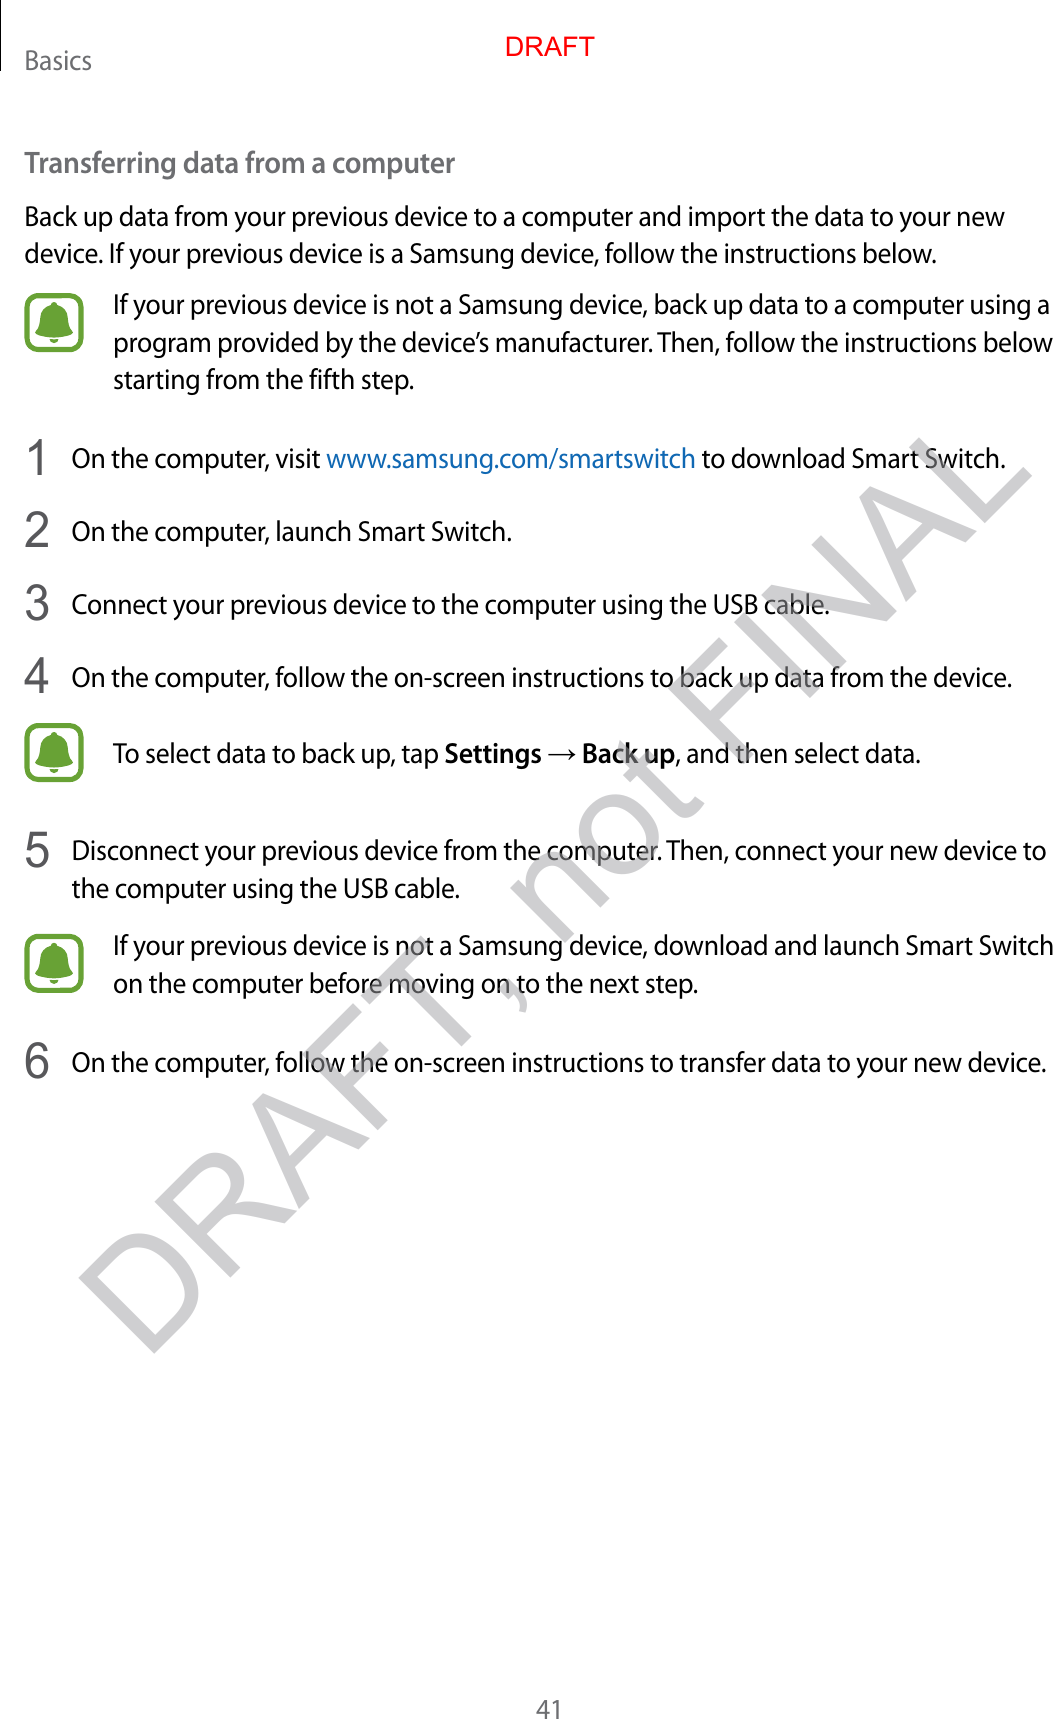 Basics41Transferring data fr om a c omputerBack up data from y our pr evious devic e to a c omput er and import the data to your new device . If your pr evious device is a Samsung device, follow the instructions below.If your previous device is not a Samsung devic e , back up data t o a comput er using a progr am pr o vided by the devic e’s manufacturer. T hen, f ollo w the instructions below starting from the fifth step.1  On the computer, visit www.samsung.com/smartswitch to download Smart Switch.2  On the computer, launch Smart Switch.3  Connect your pr evious device t o the comput er using the USB cable .4  On the computer, follow the on-scr een instructions to back up data fr om the device.To select data to back up , tap Settings → Back up, and then select data.5  Disconnect your previous devic e fr om the comput er. Then, connect your new device to the computer using the USB cable .If your previous device is not a Samsung devic e , do wnload and launch Smart Switch on the computer bef or e mo ving on t o the next step.6  On the computer, follow the on-scr een instructions to transf er da ta to y our new devic e .DRAFTDRAFT, not FINAL